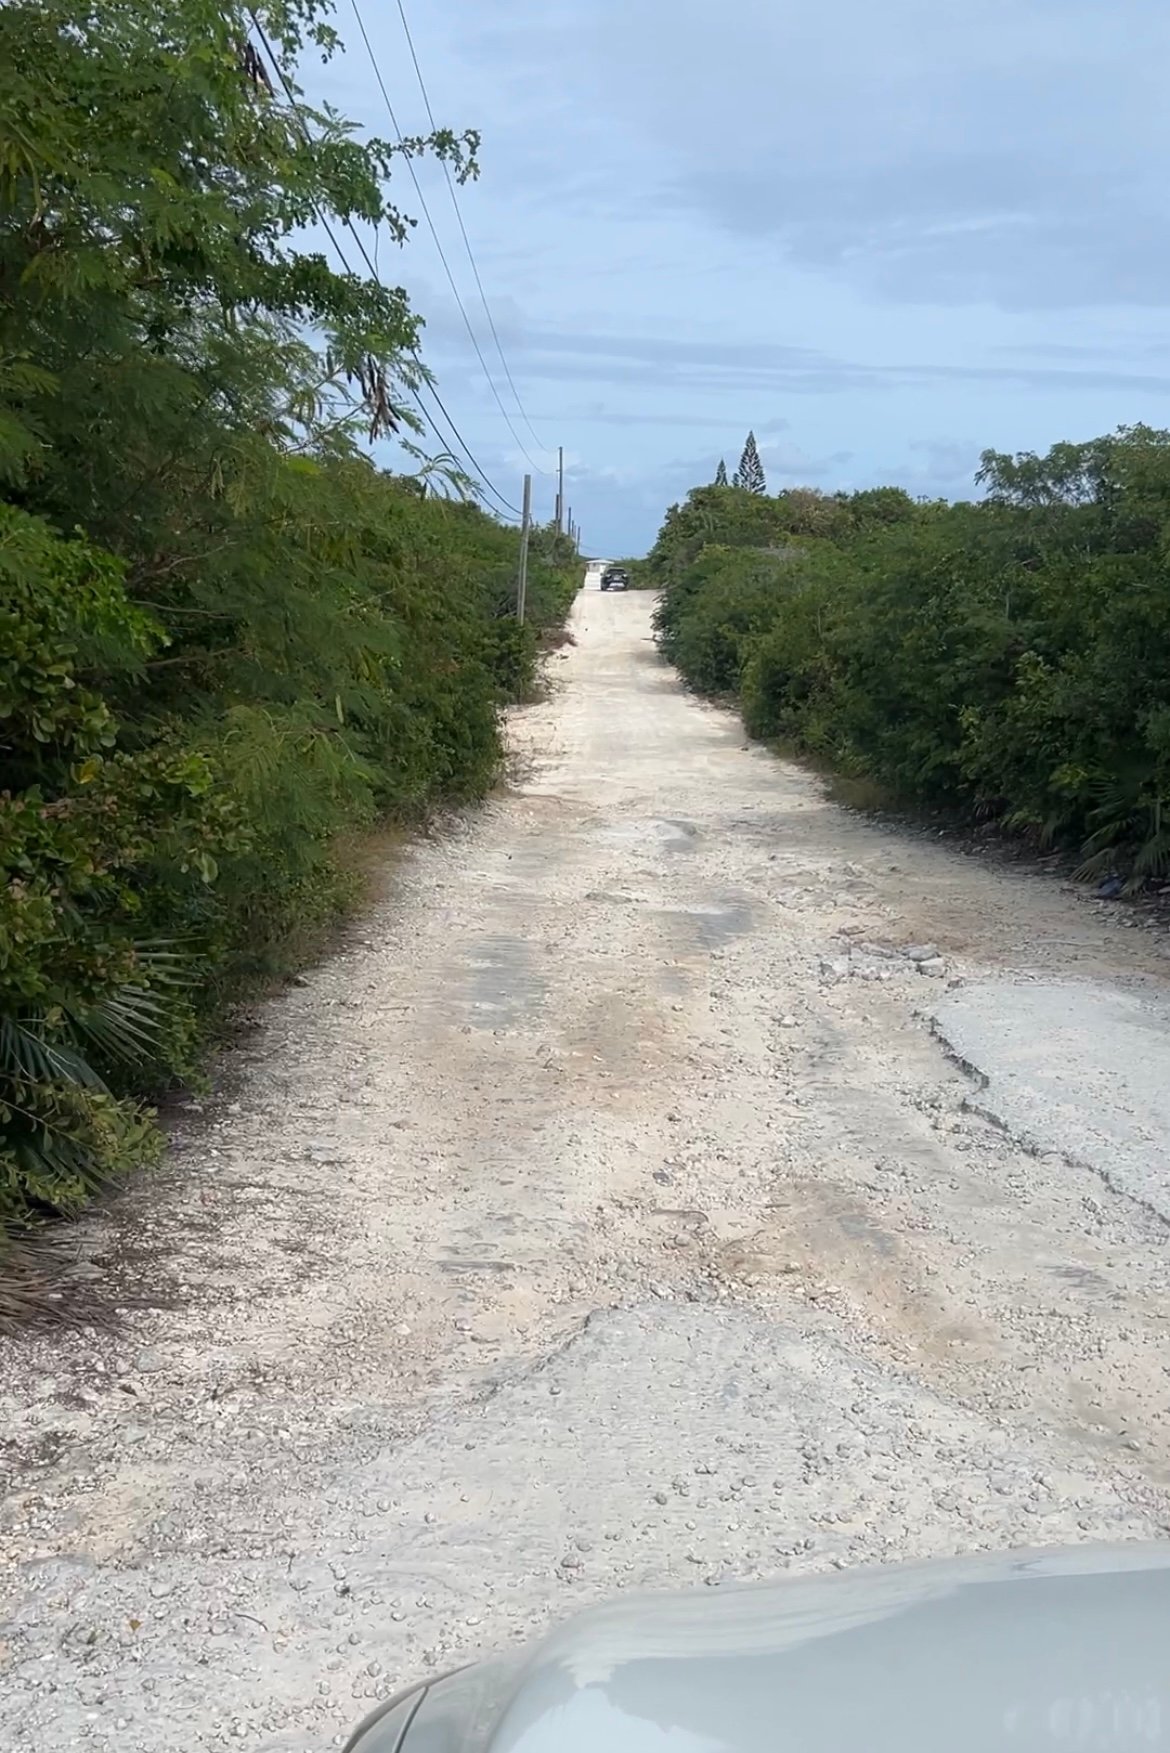 The road to the tropic of Cancer Beach.